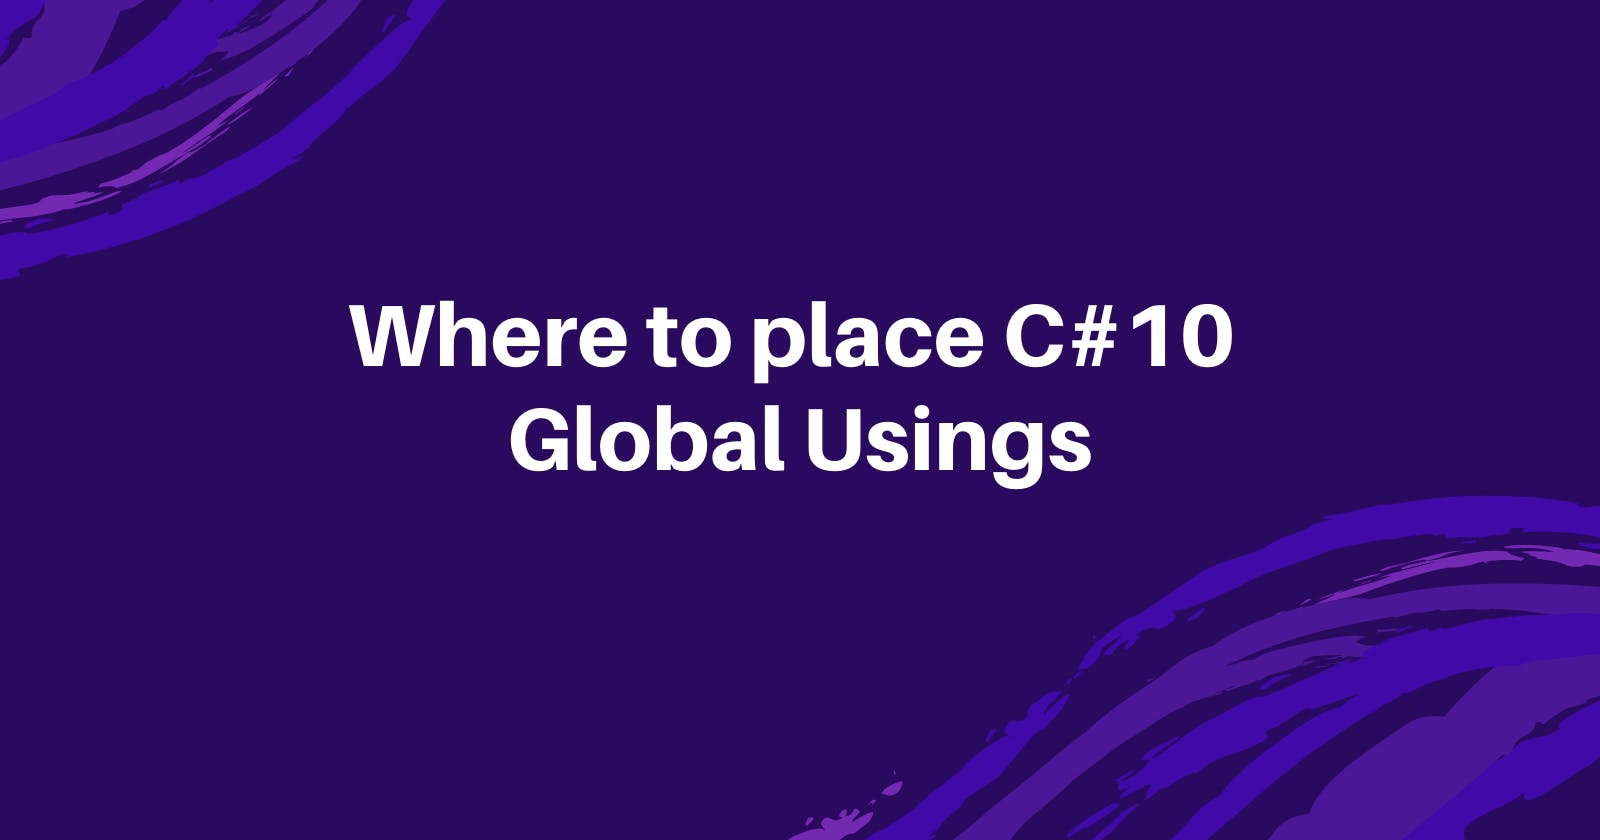 Where to place C#10 Global Usings